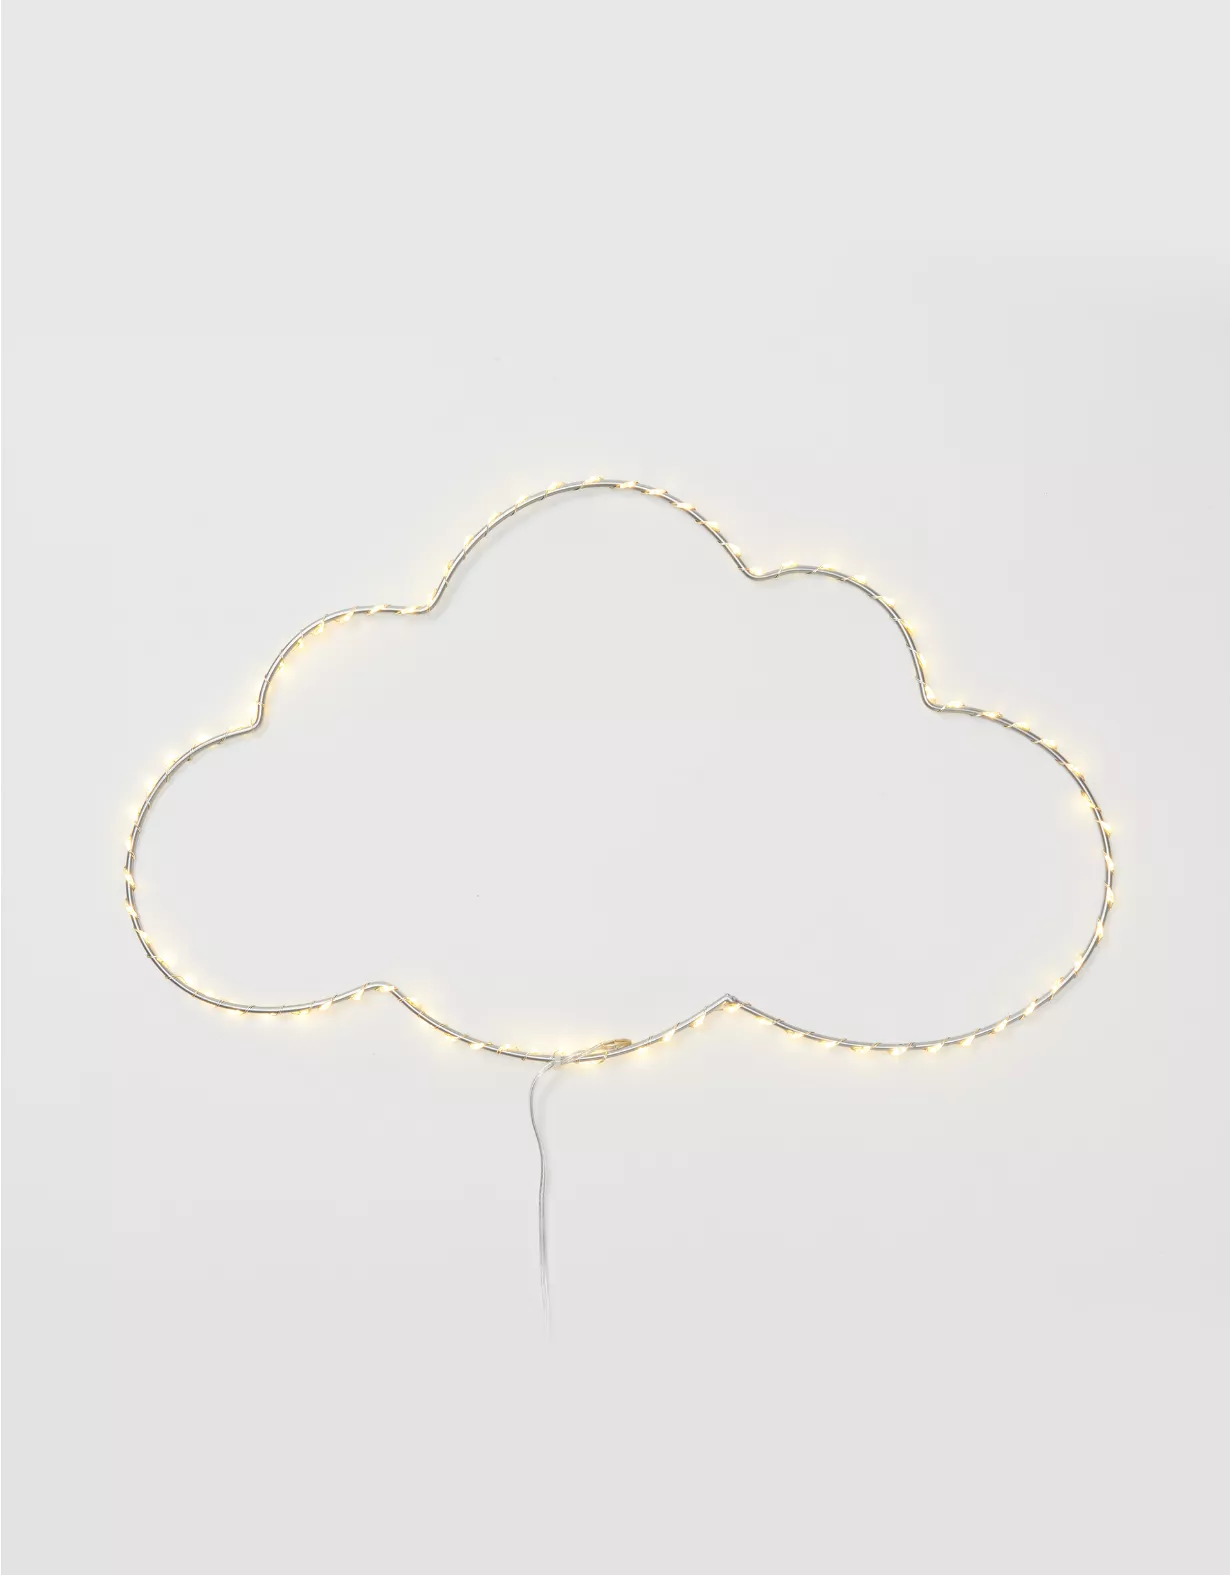 Dormify Wire Wall Light Cloud